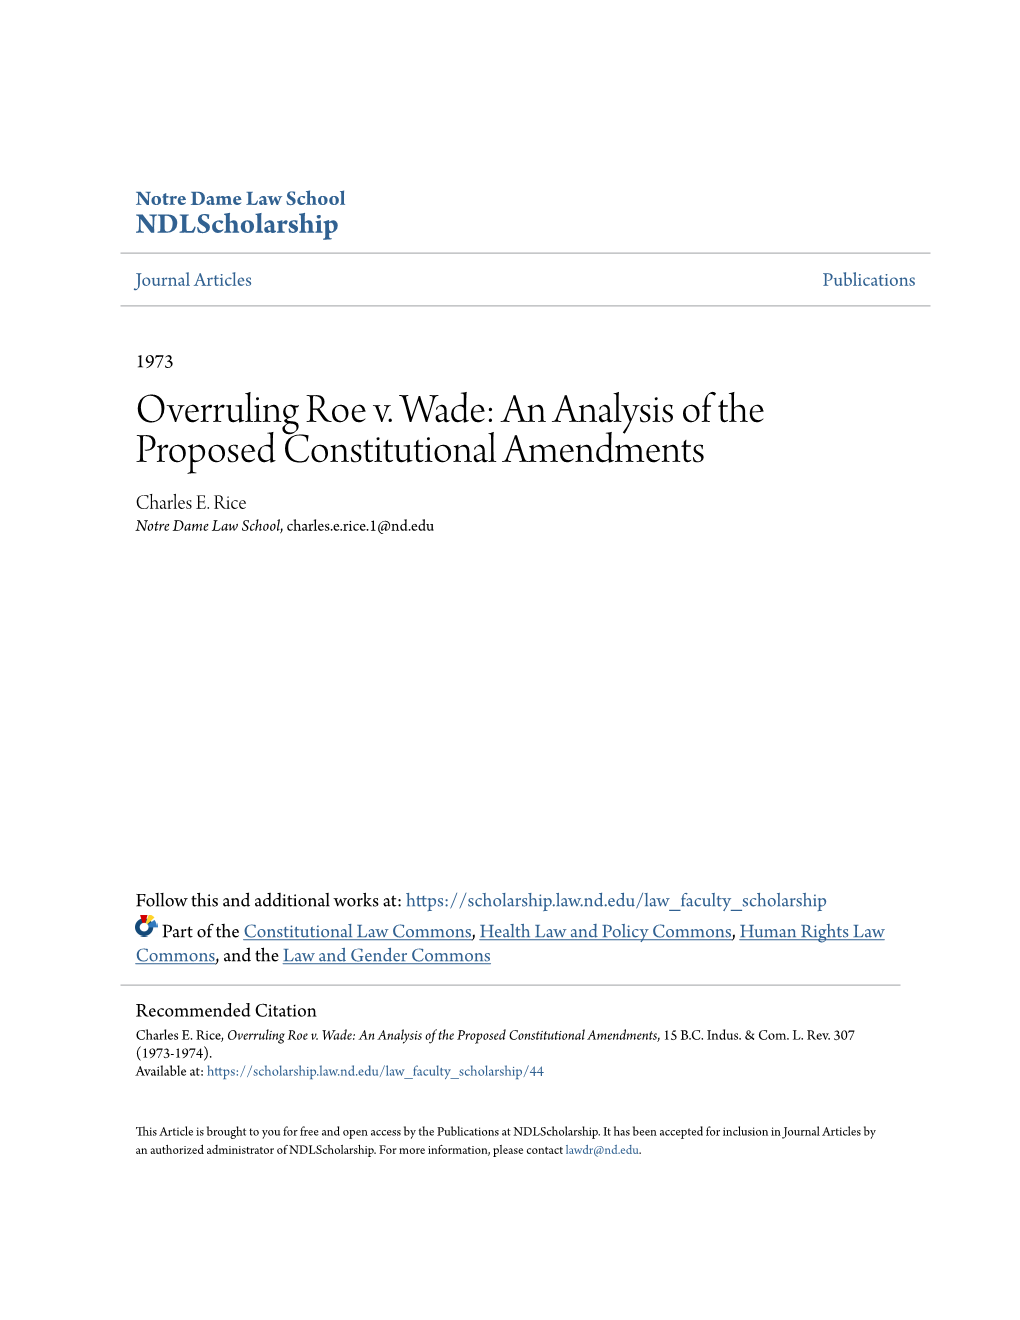 Overruling Roe V. Wade: an Analysis of the Proposed Constitutional Amendments Charles E